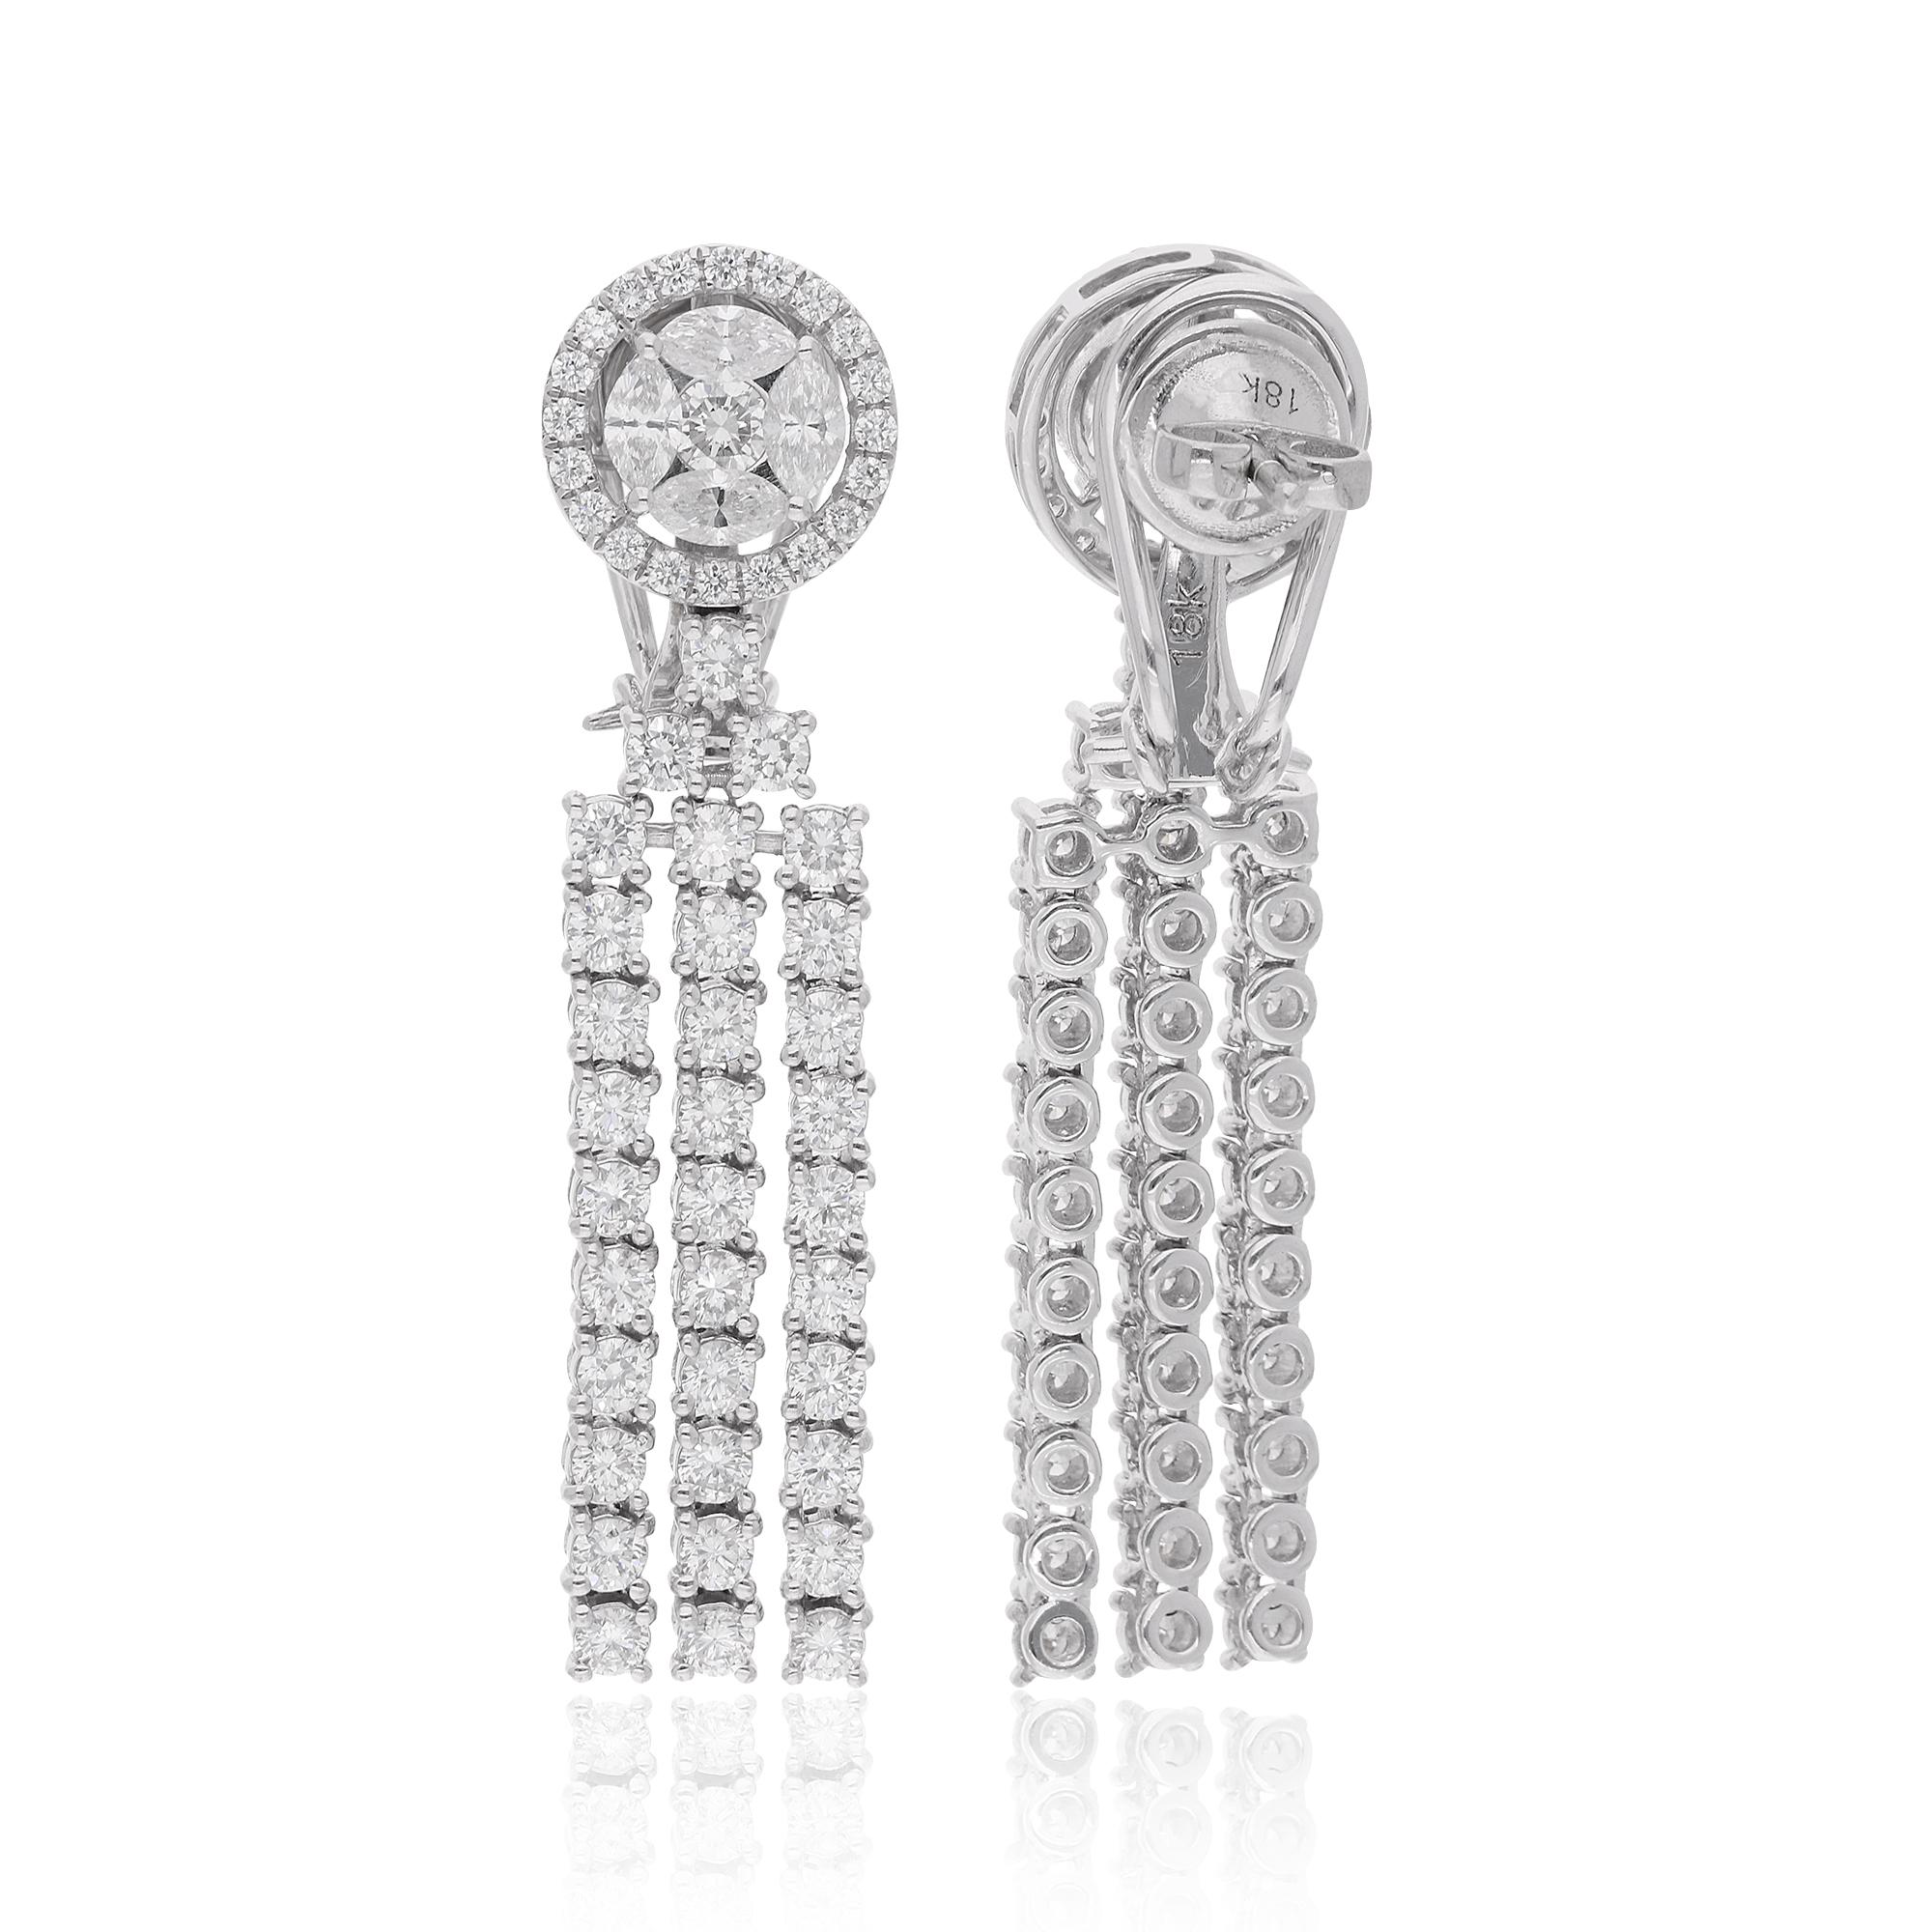 Indulge in the epitome of luxury and sophistication with these stunning Natural 4.38 Carat Round Diamond Chandelier Earrings crafted in 14 Karat White Gold. Exquisitely designed to captivate the eye and adorn the wearer with unparalleled elegance,